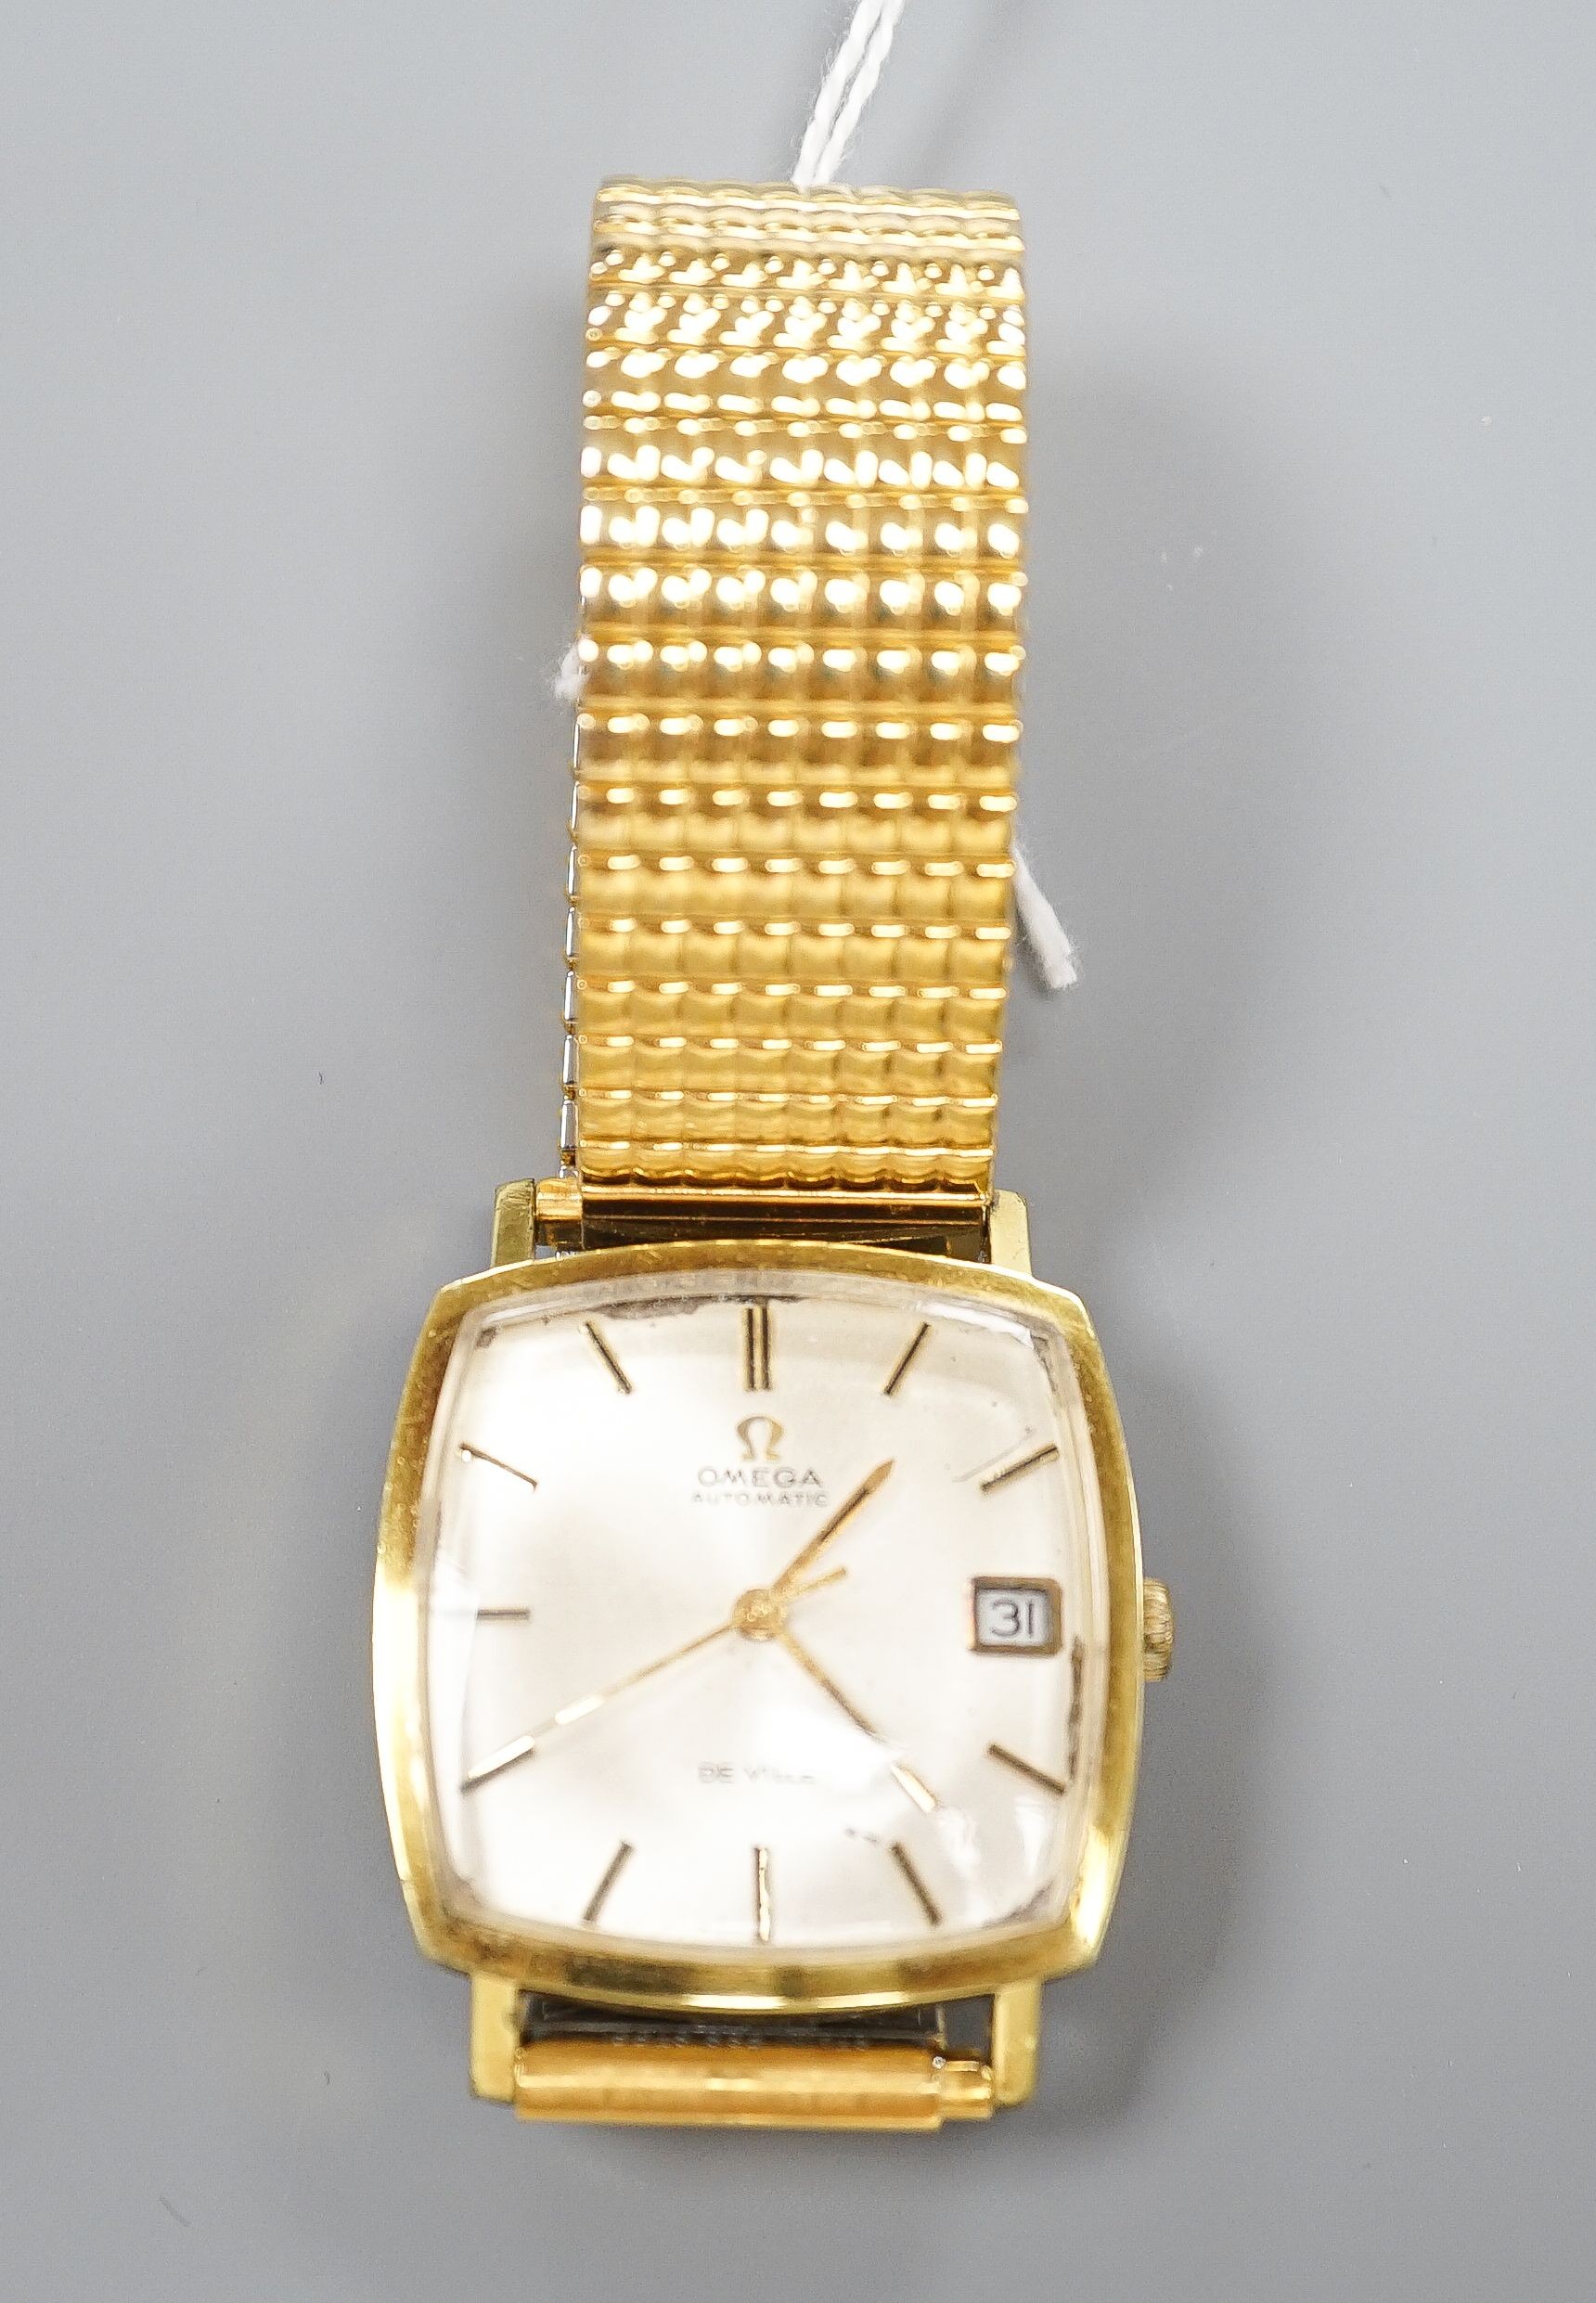 A gentleman's steel and gold plated Omega De Ville automatic wrist watch, on associated flexible strap, case diameter 32mm, no box or papers.